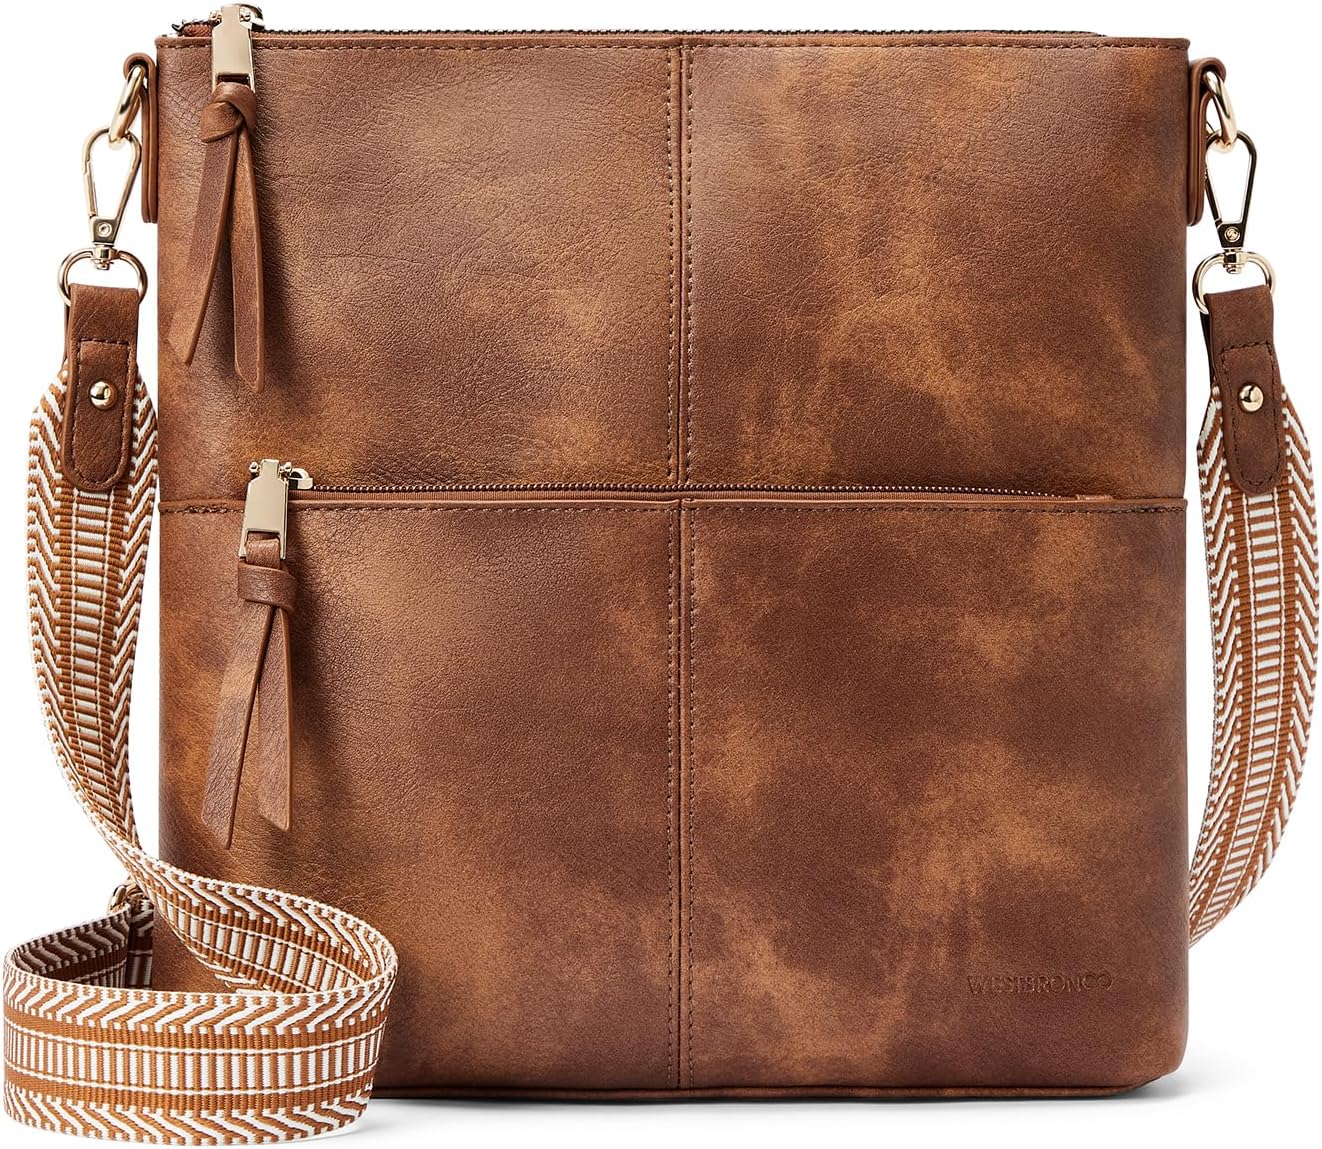 Hurry! Exclusive Promo: WESTBRONCO Crossbody Purses for Women - Save 40% Now!